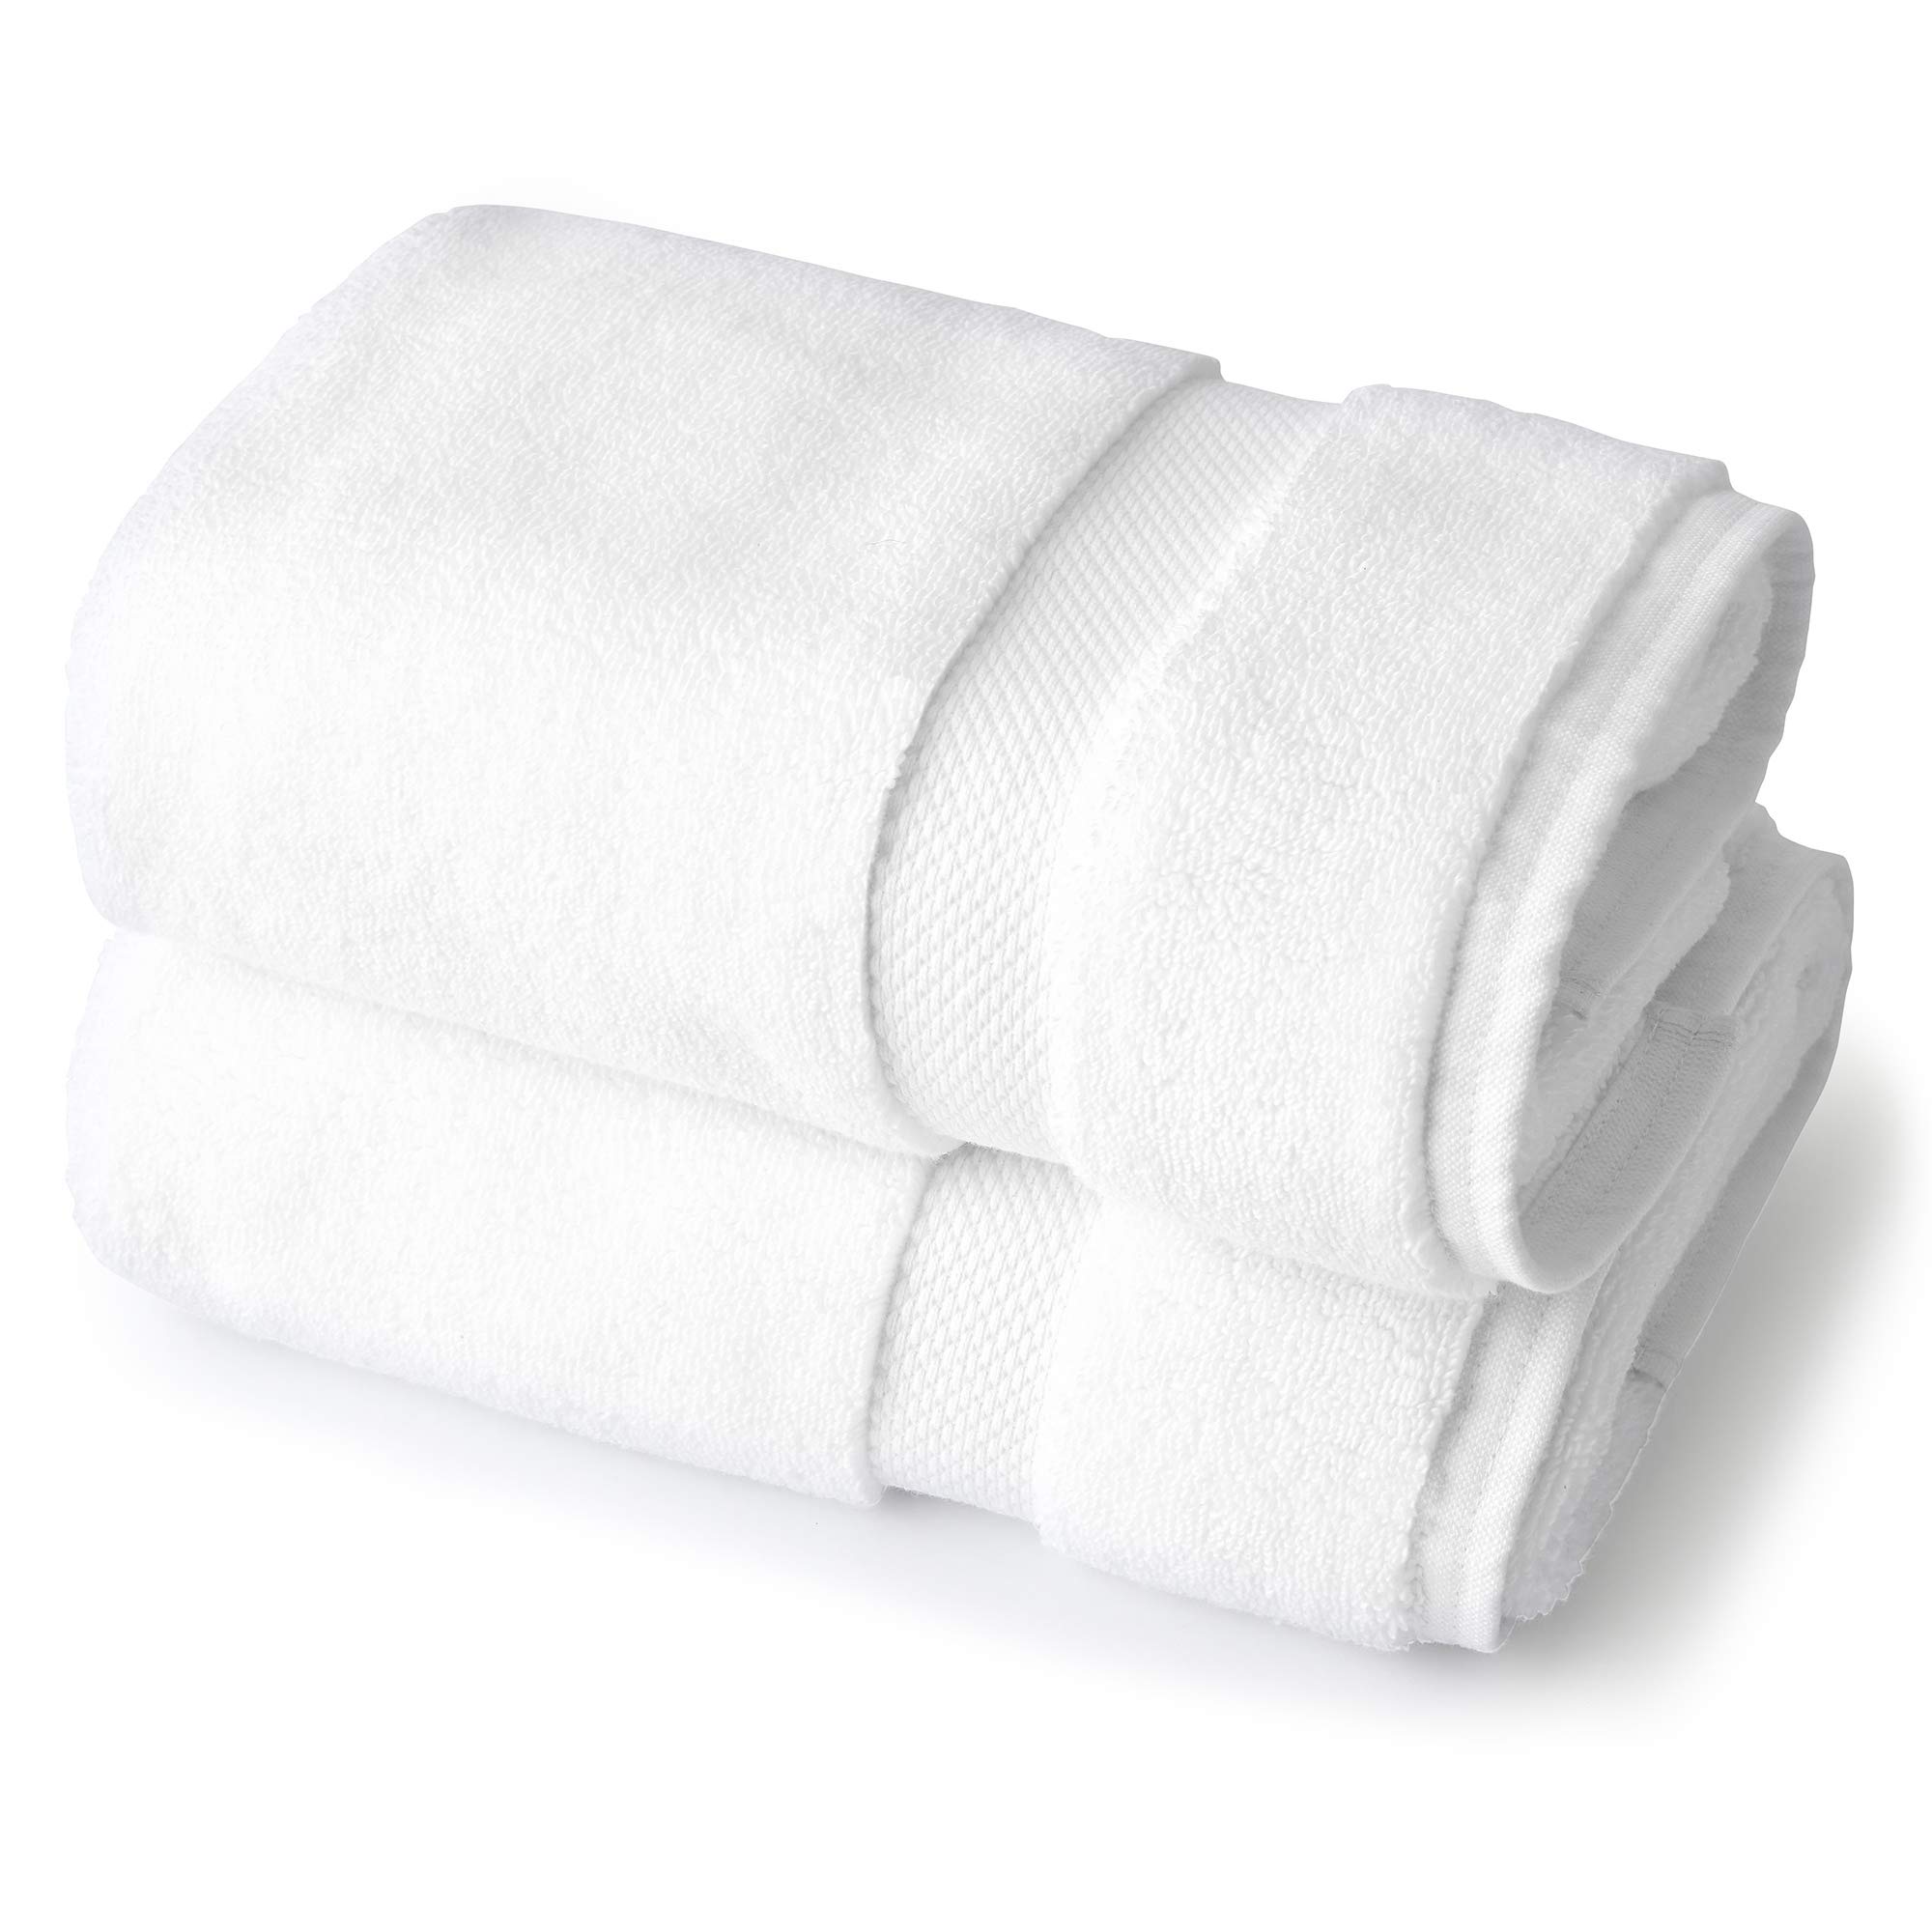 Hotel Collection 900 GSM Long Staple Combed Cotton 2-Piece Bath Towel Set White/Navy